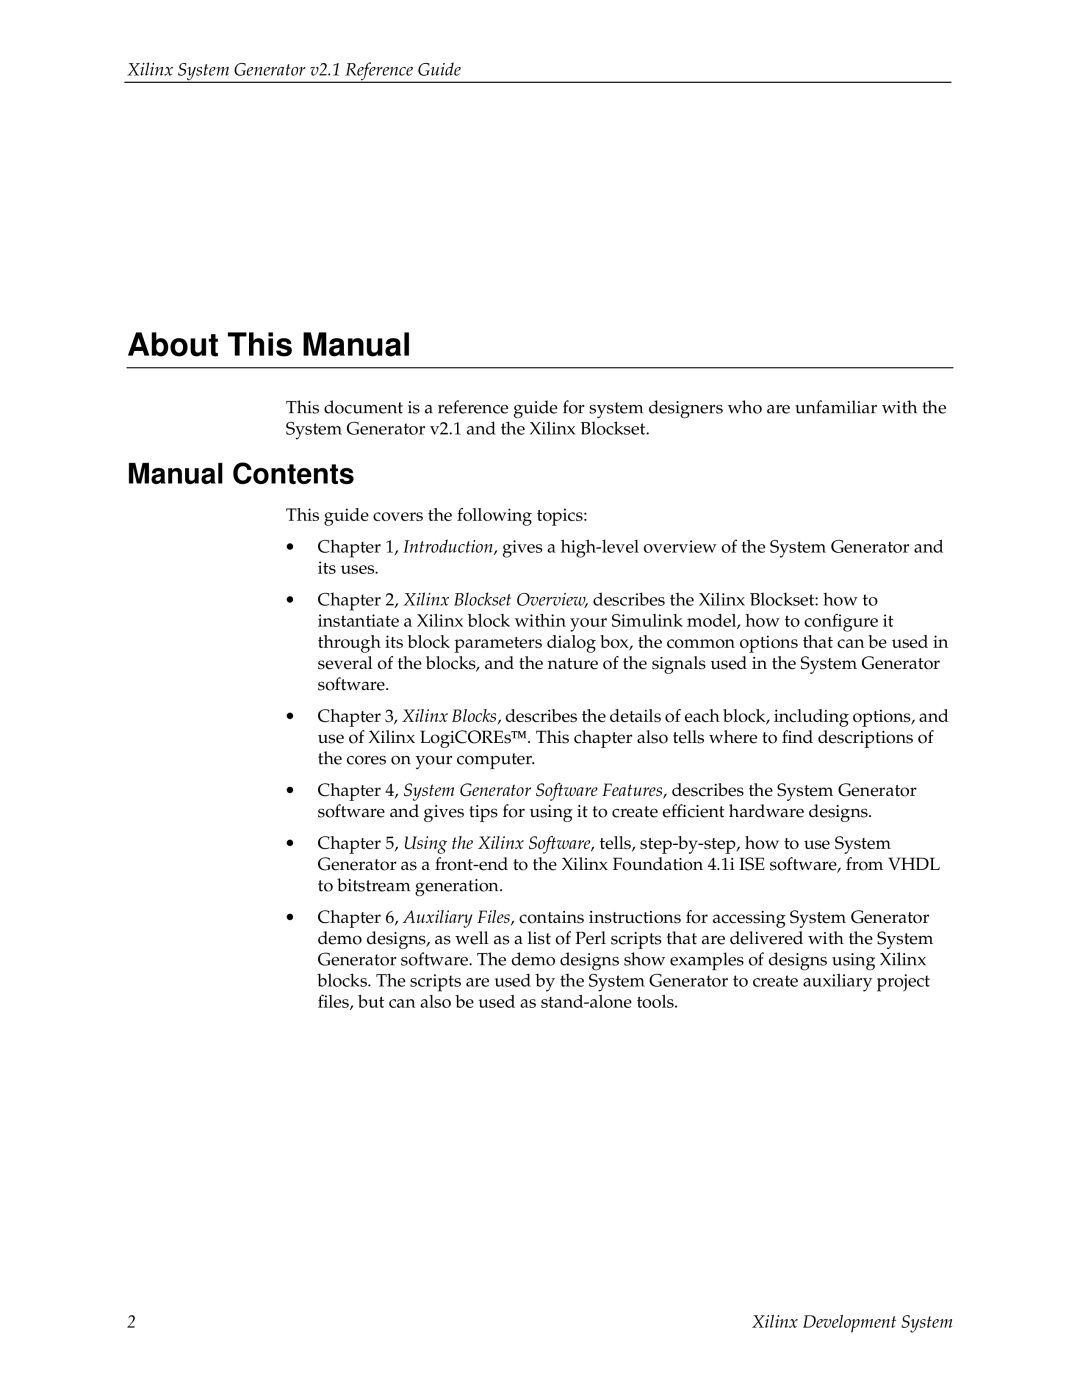 Xilinx V2.1 About This Manual, Manual Contents, Xilinx System Generator v2.1 Reference Guide, Xilinx Development System 